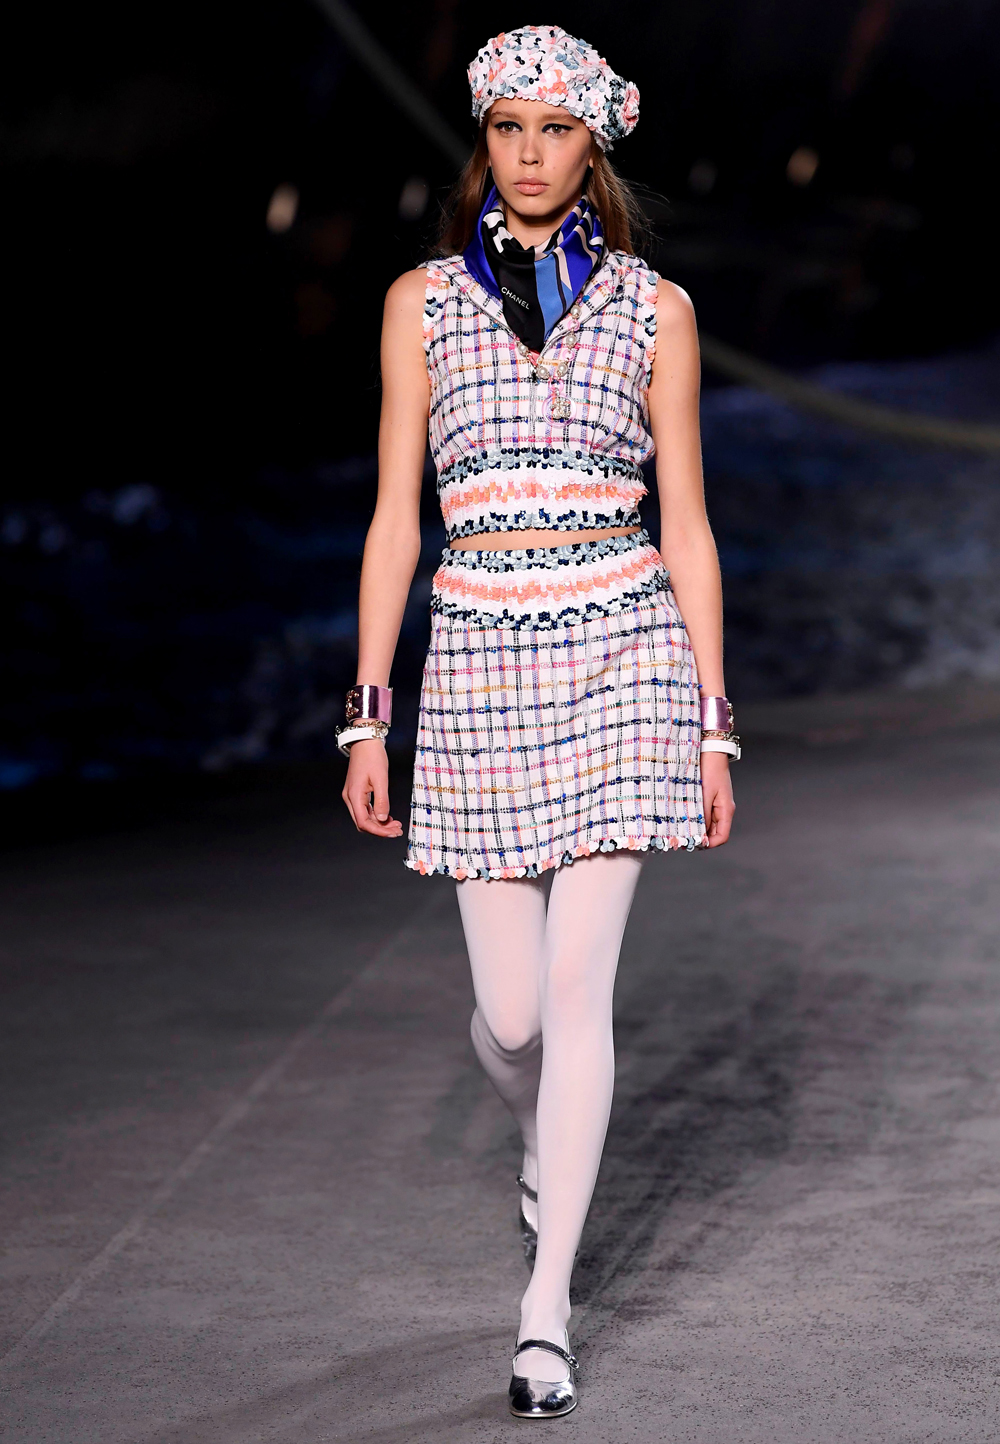 Chanel’s 2019 Cruise Show was Pure Nautical Magic | About Her